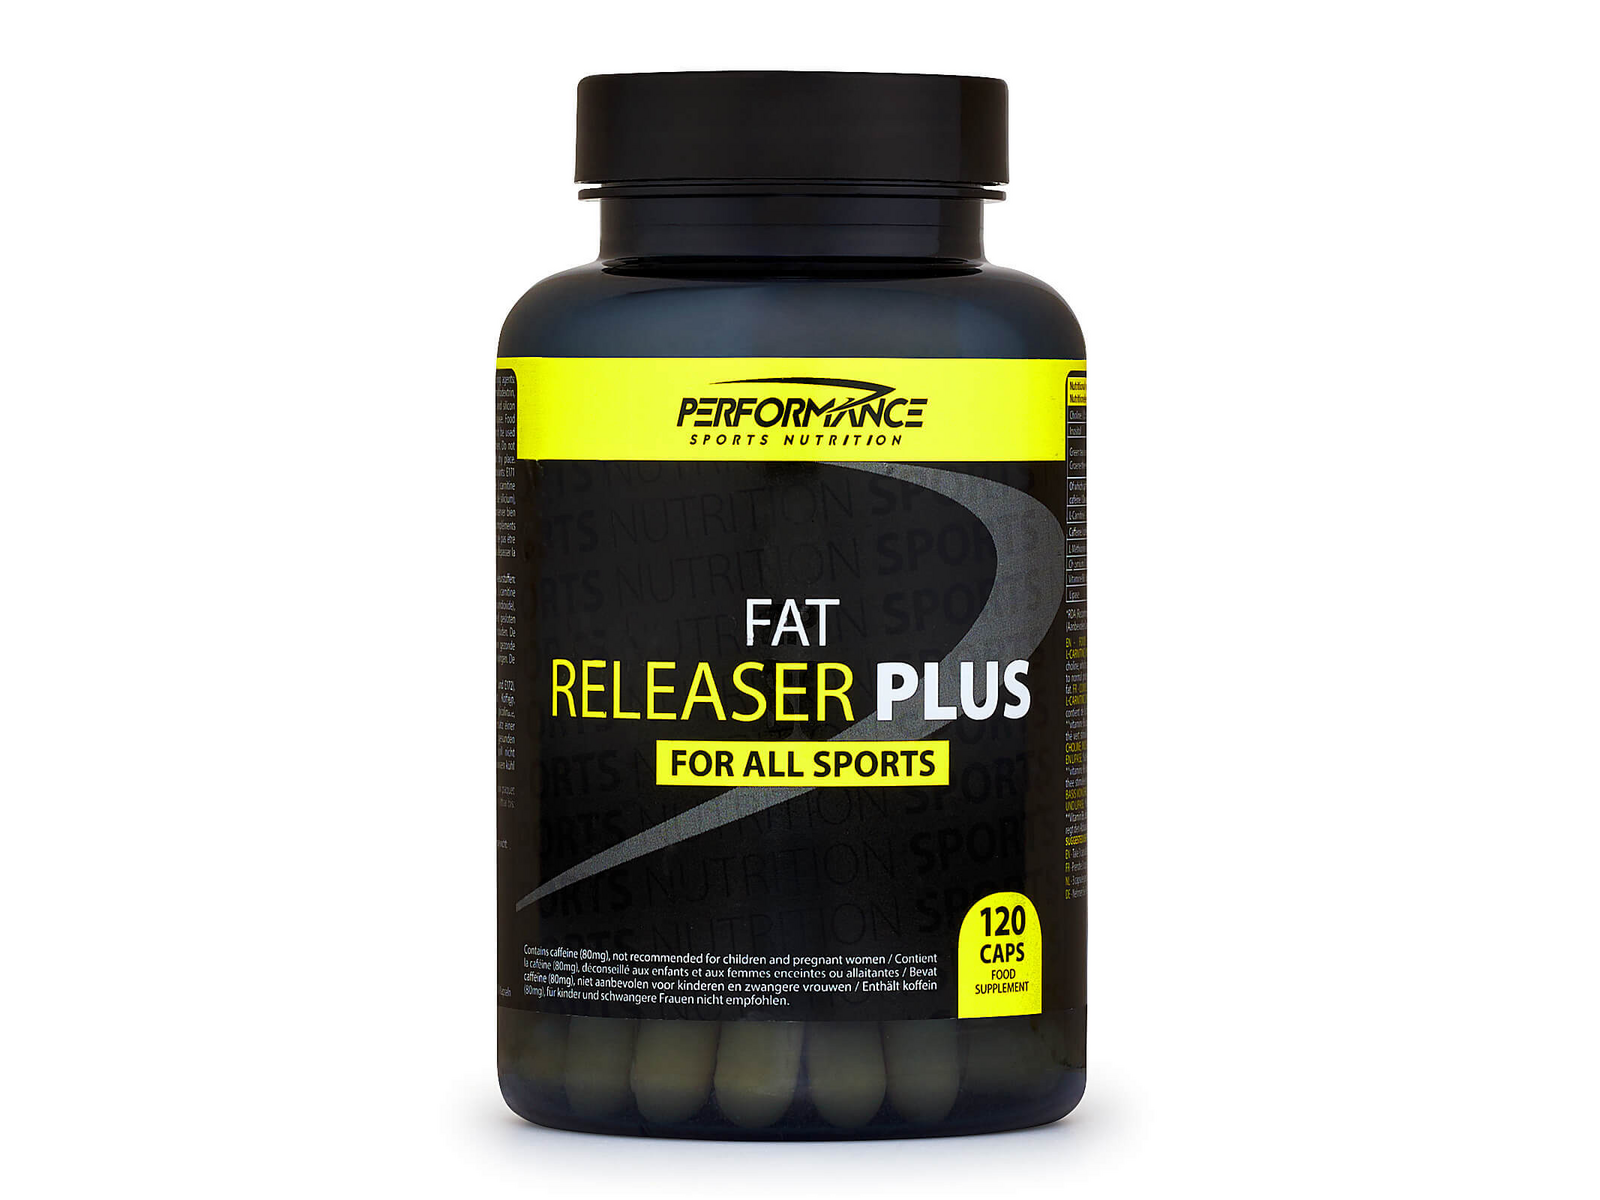 FAT RELEASER PLUS (120 tablets) - PERFORMANCE SPORTS NUTRITION